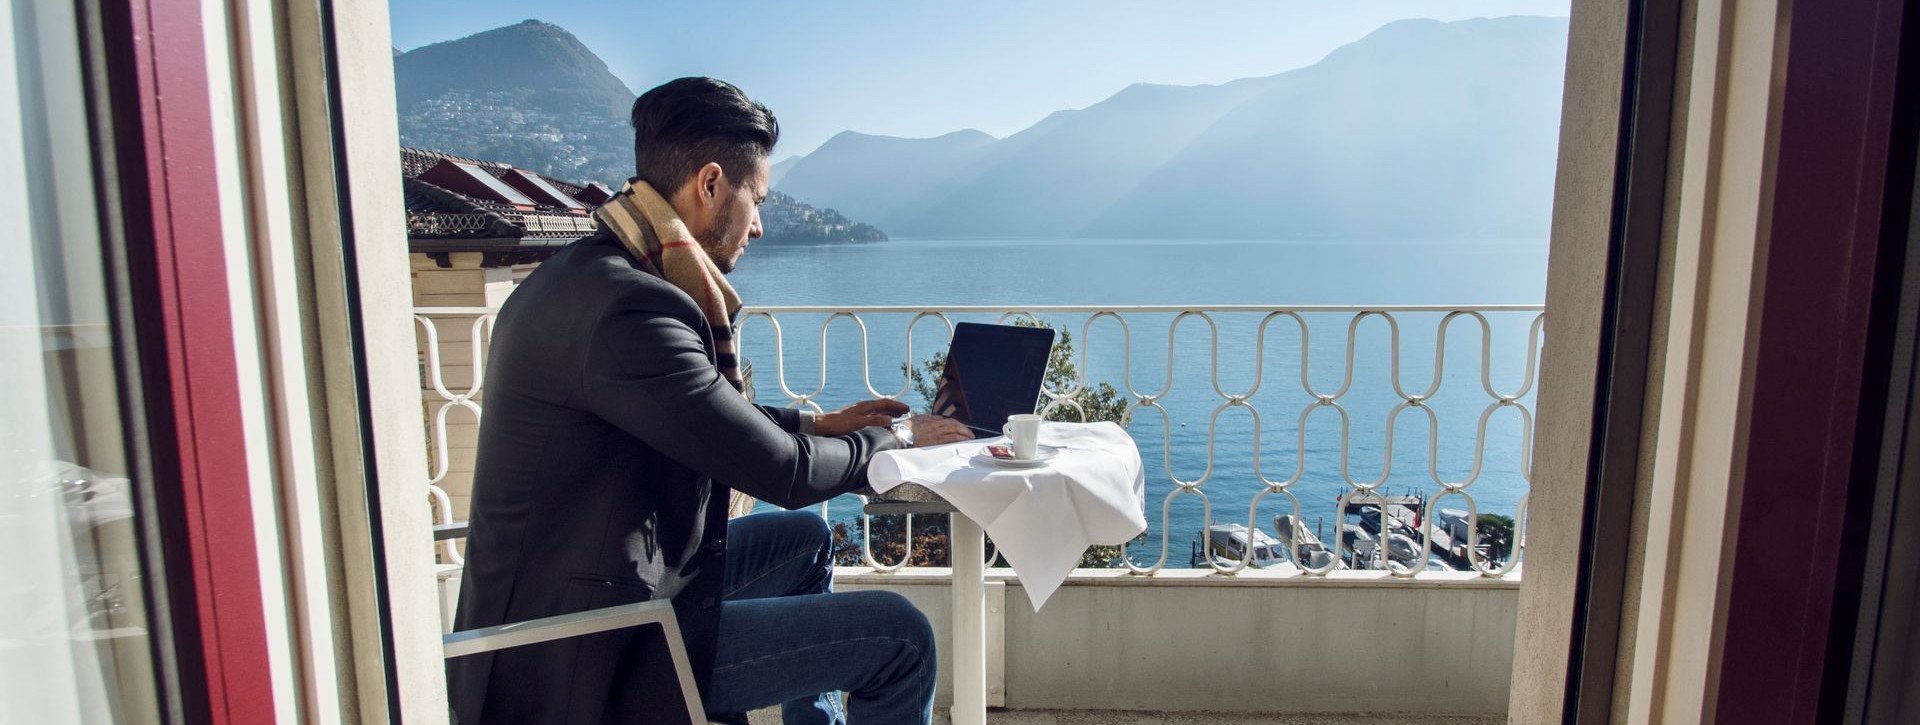 A man works on his notebook on the balcony with lake view